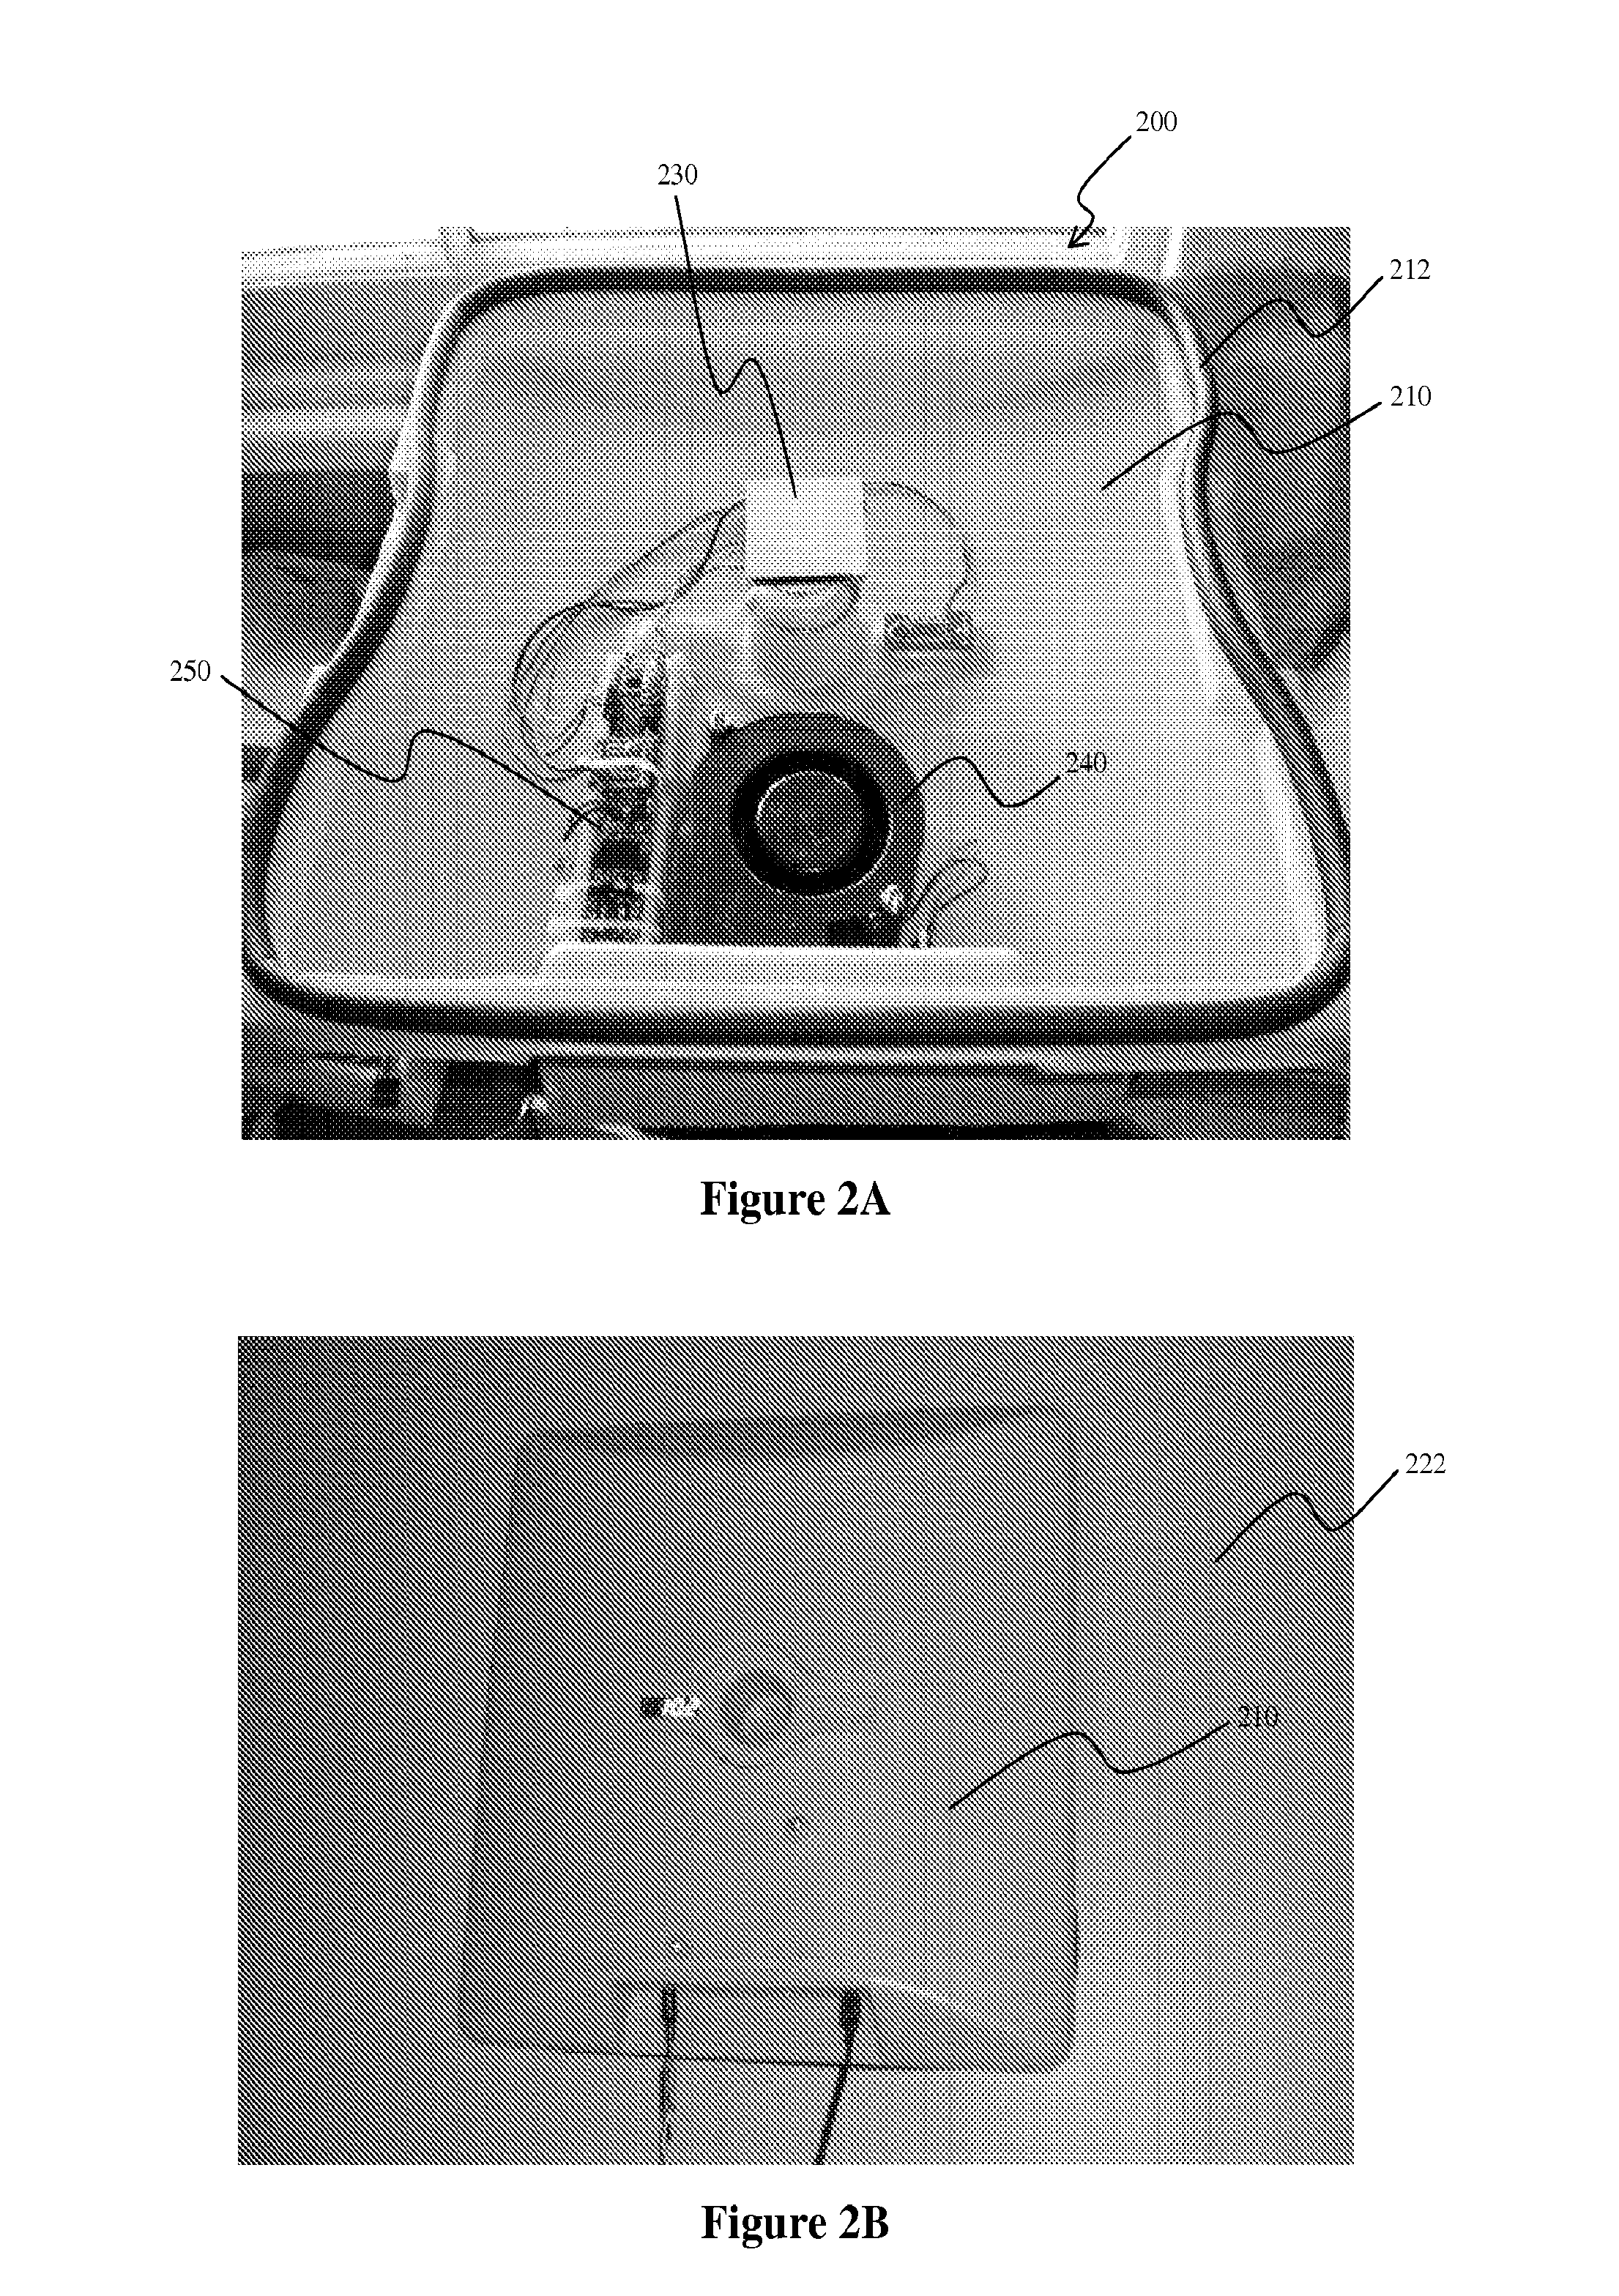 Thermal Resistance Measuring Device